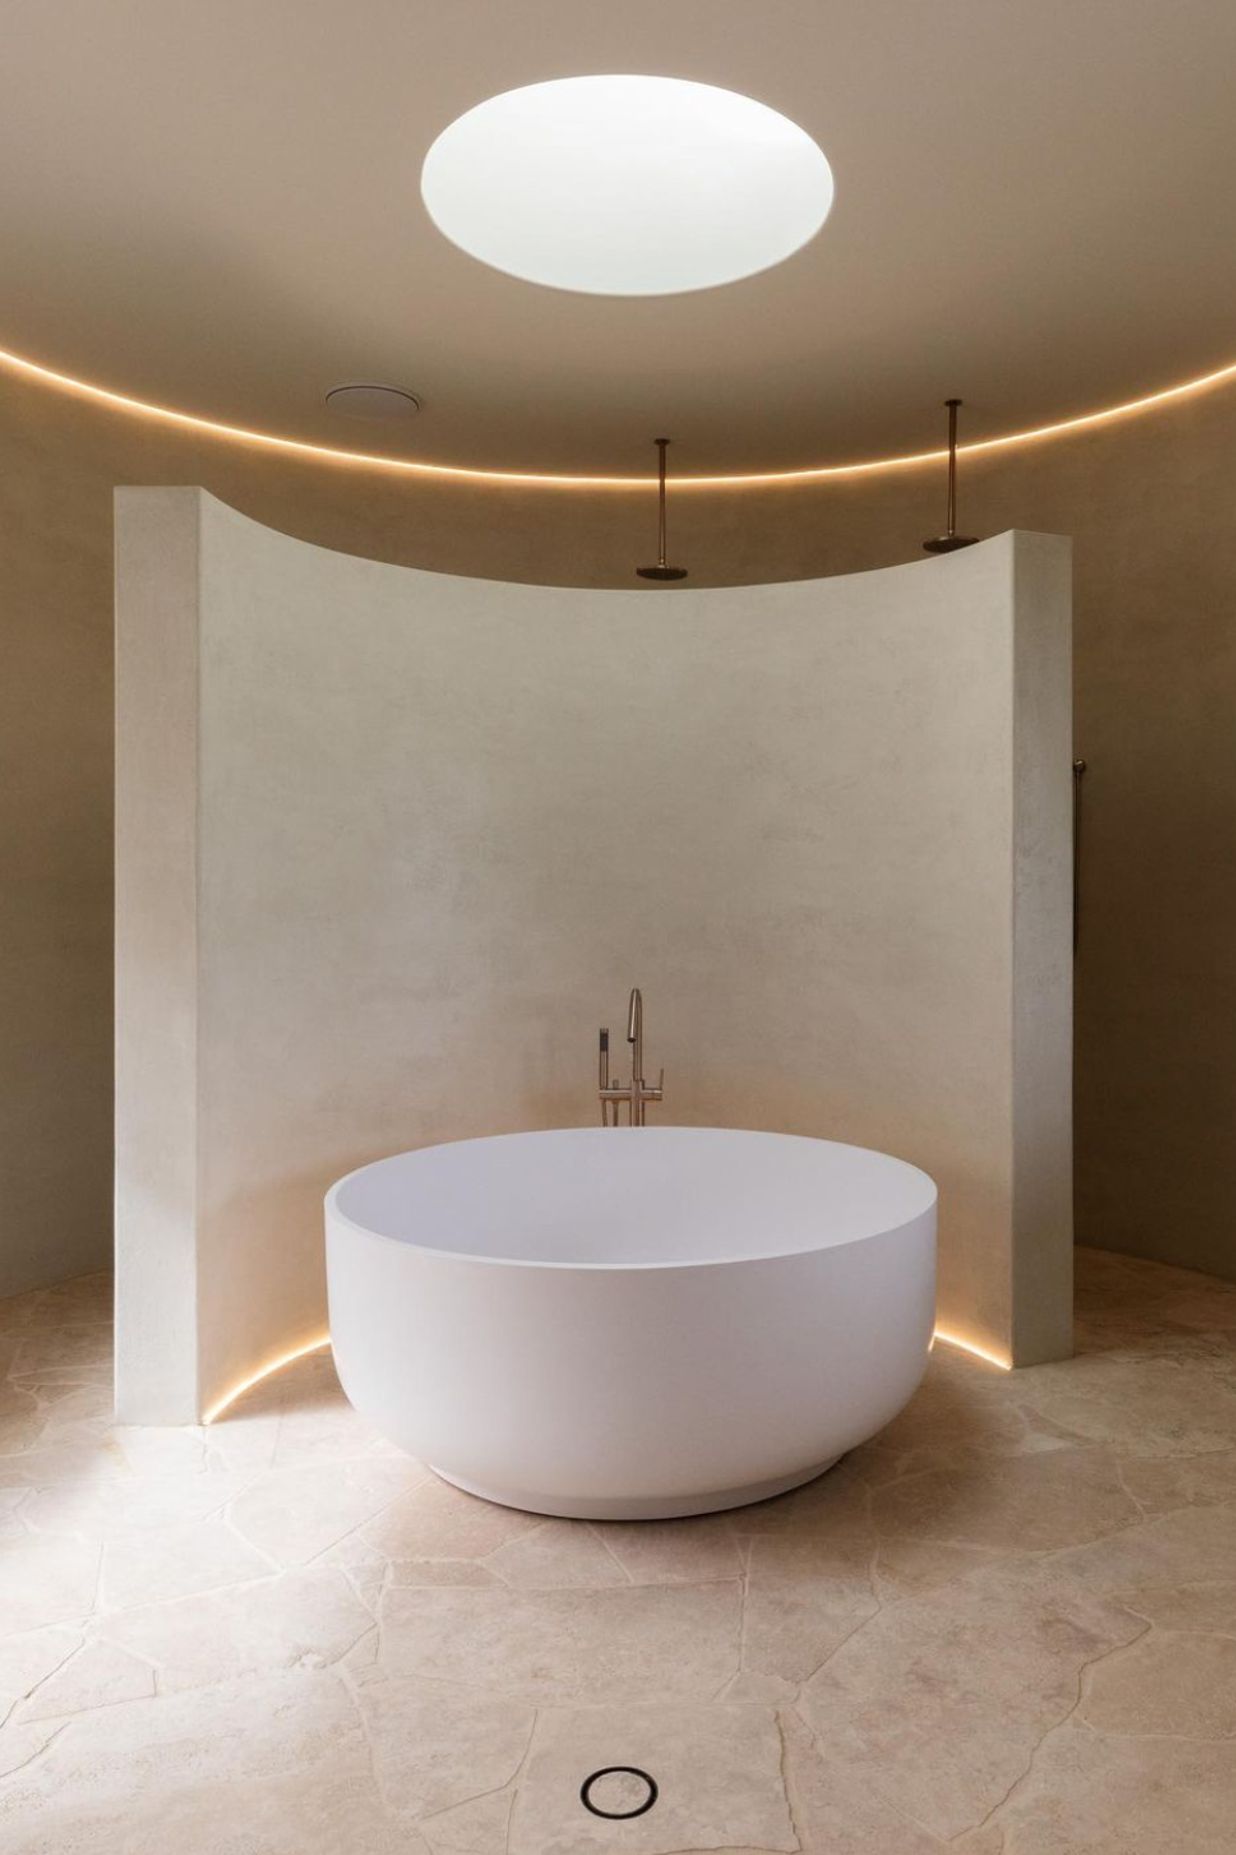 The design of the Silvia ST13 Circular Bath from Stonebaths is influenced by the Japanese soaking tub.